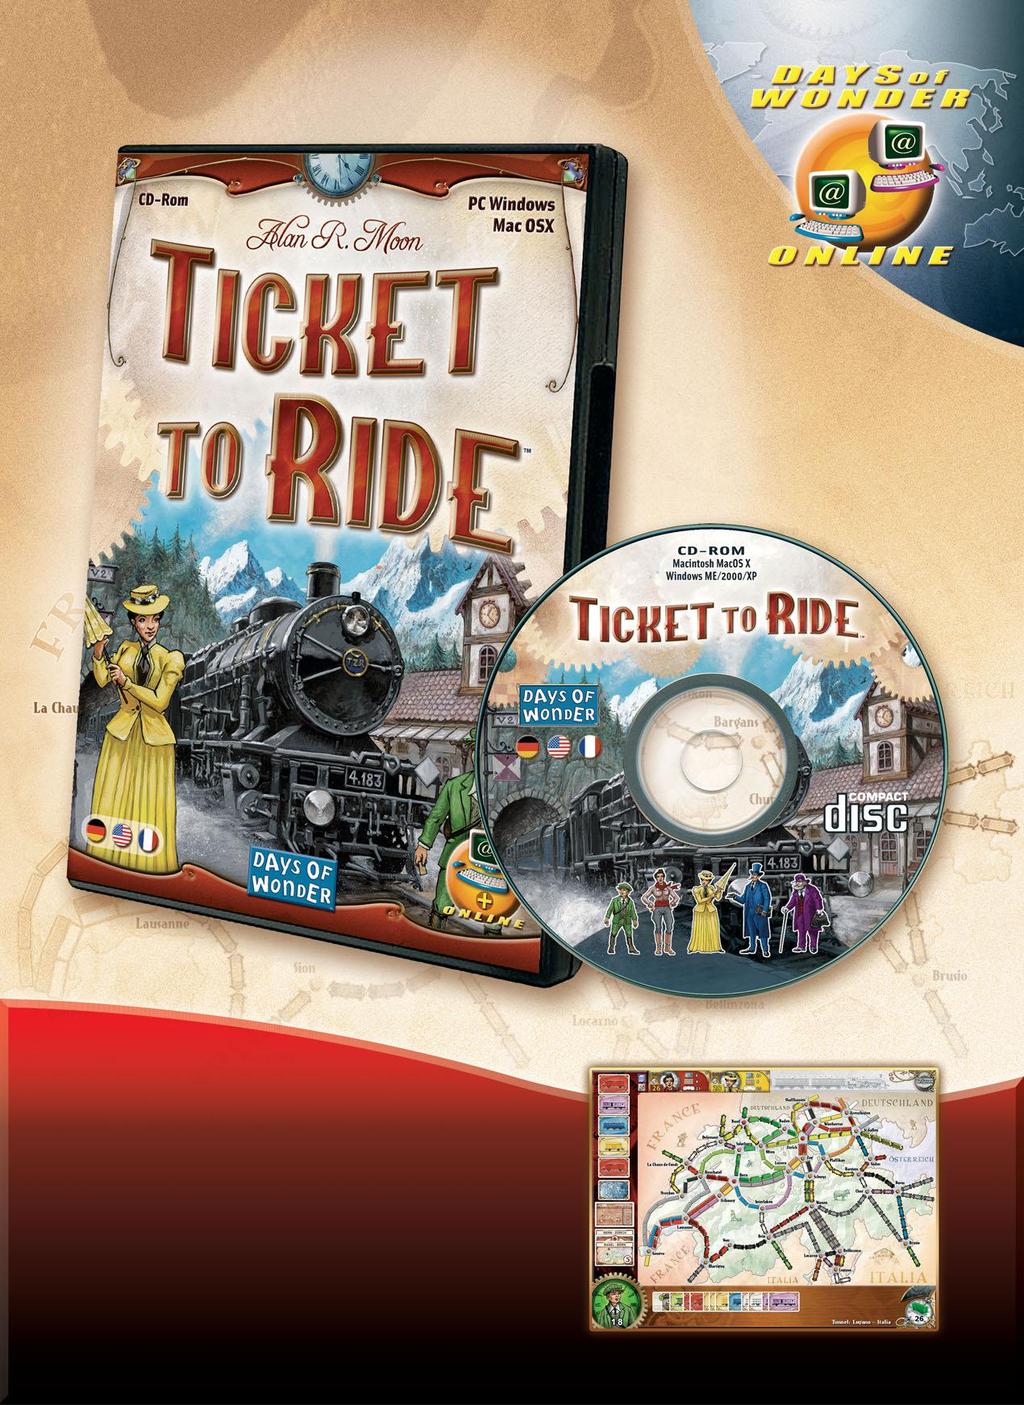 Mac OSX and PC Windows All aboard this computer game version of the famous award-winning board game : Ticket to Ride!